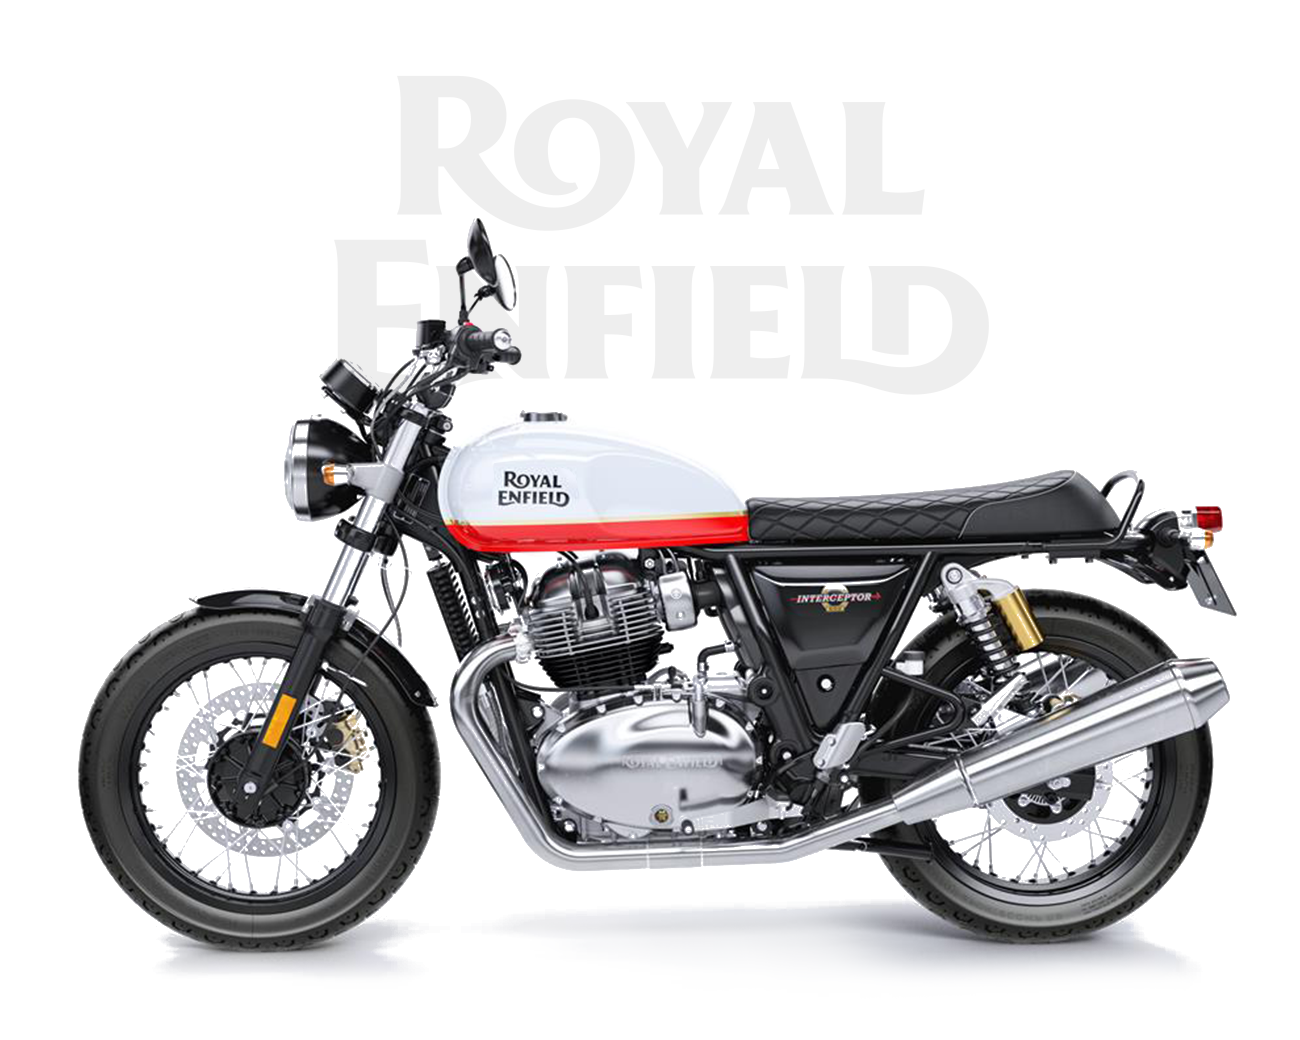 https://www.centralbikes.co.uk/static/23b9aa693e4155fe652680e250a71af2/largel-royal-enfield-brands-img.png